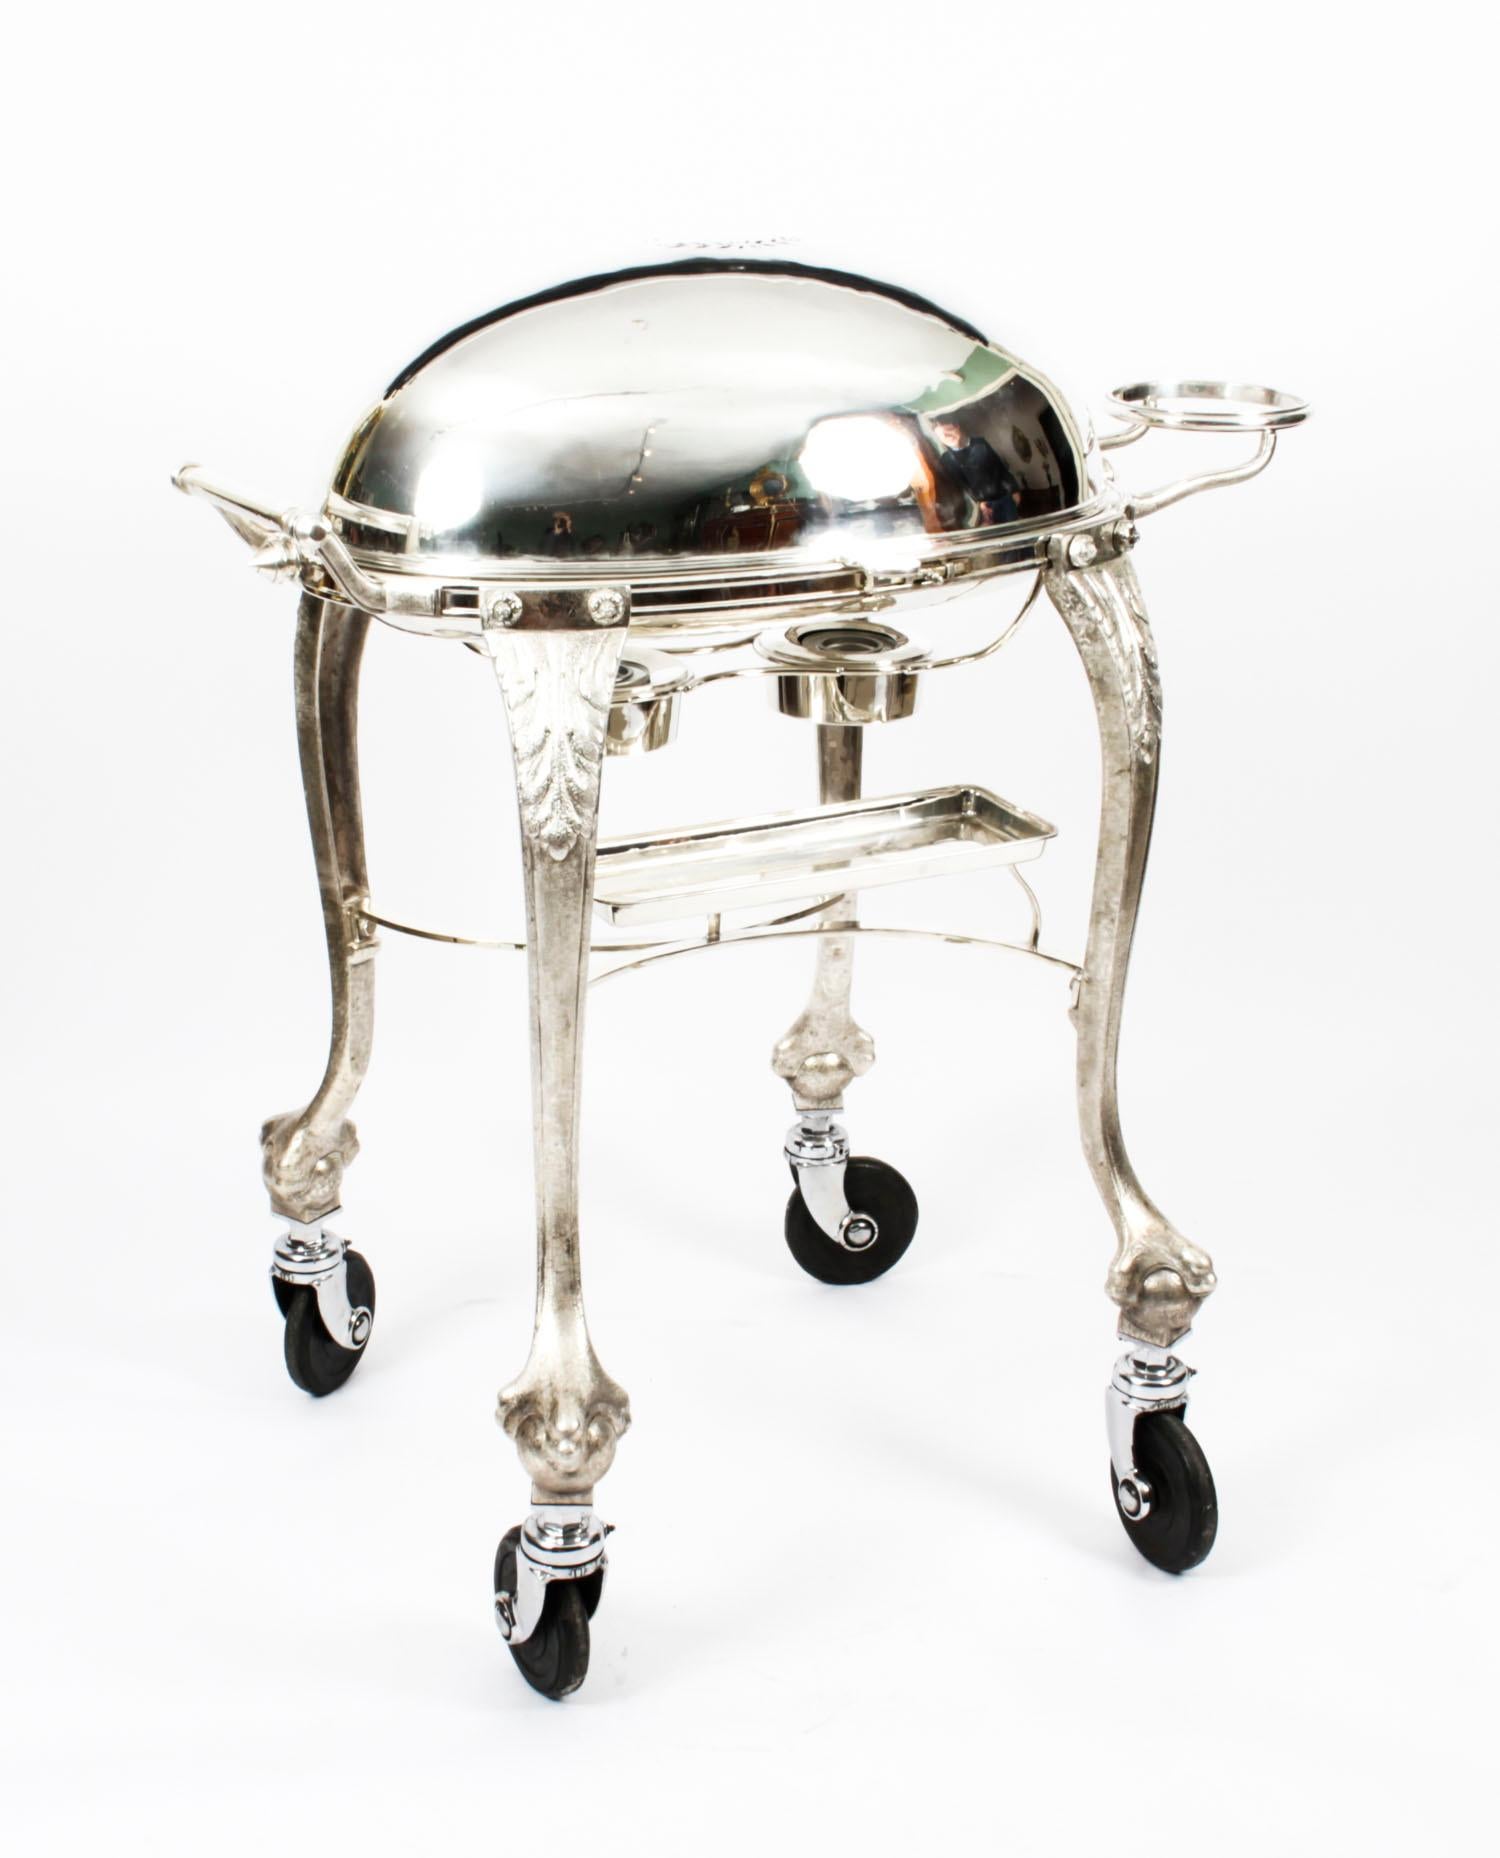 A magnificent and rare fully restored antique Art Deco silver plate serving cart, circa 1930 in date. 

Serve your roast beef in style!!

This stunning trolley is suitable for serving cooked meats such as roast beef, lamb, and turkey.

It